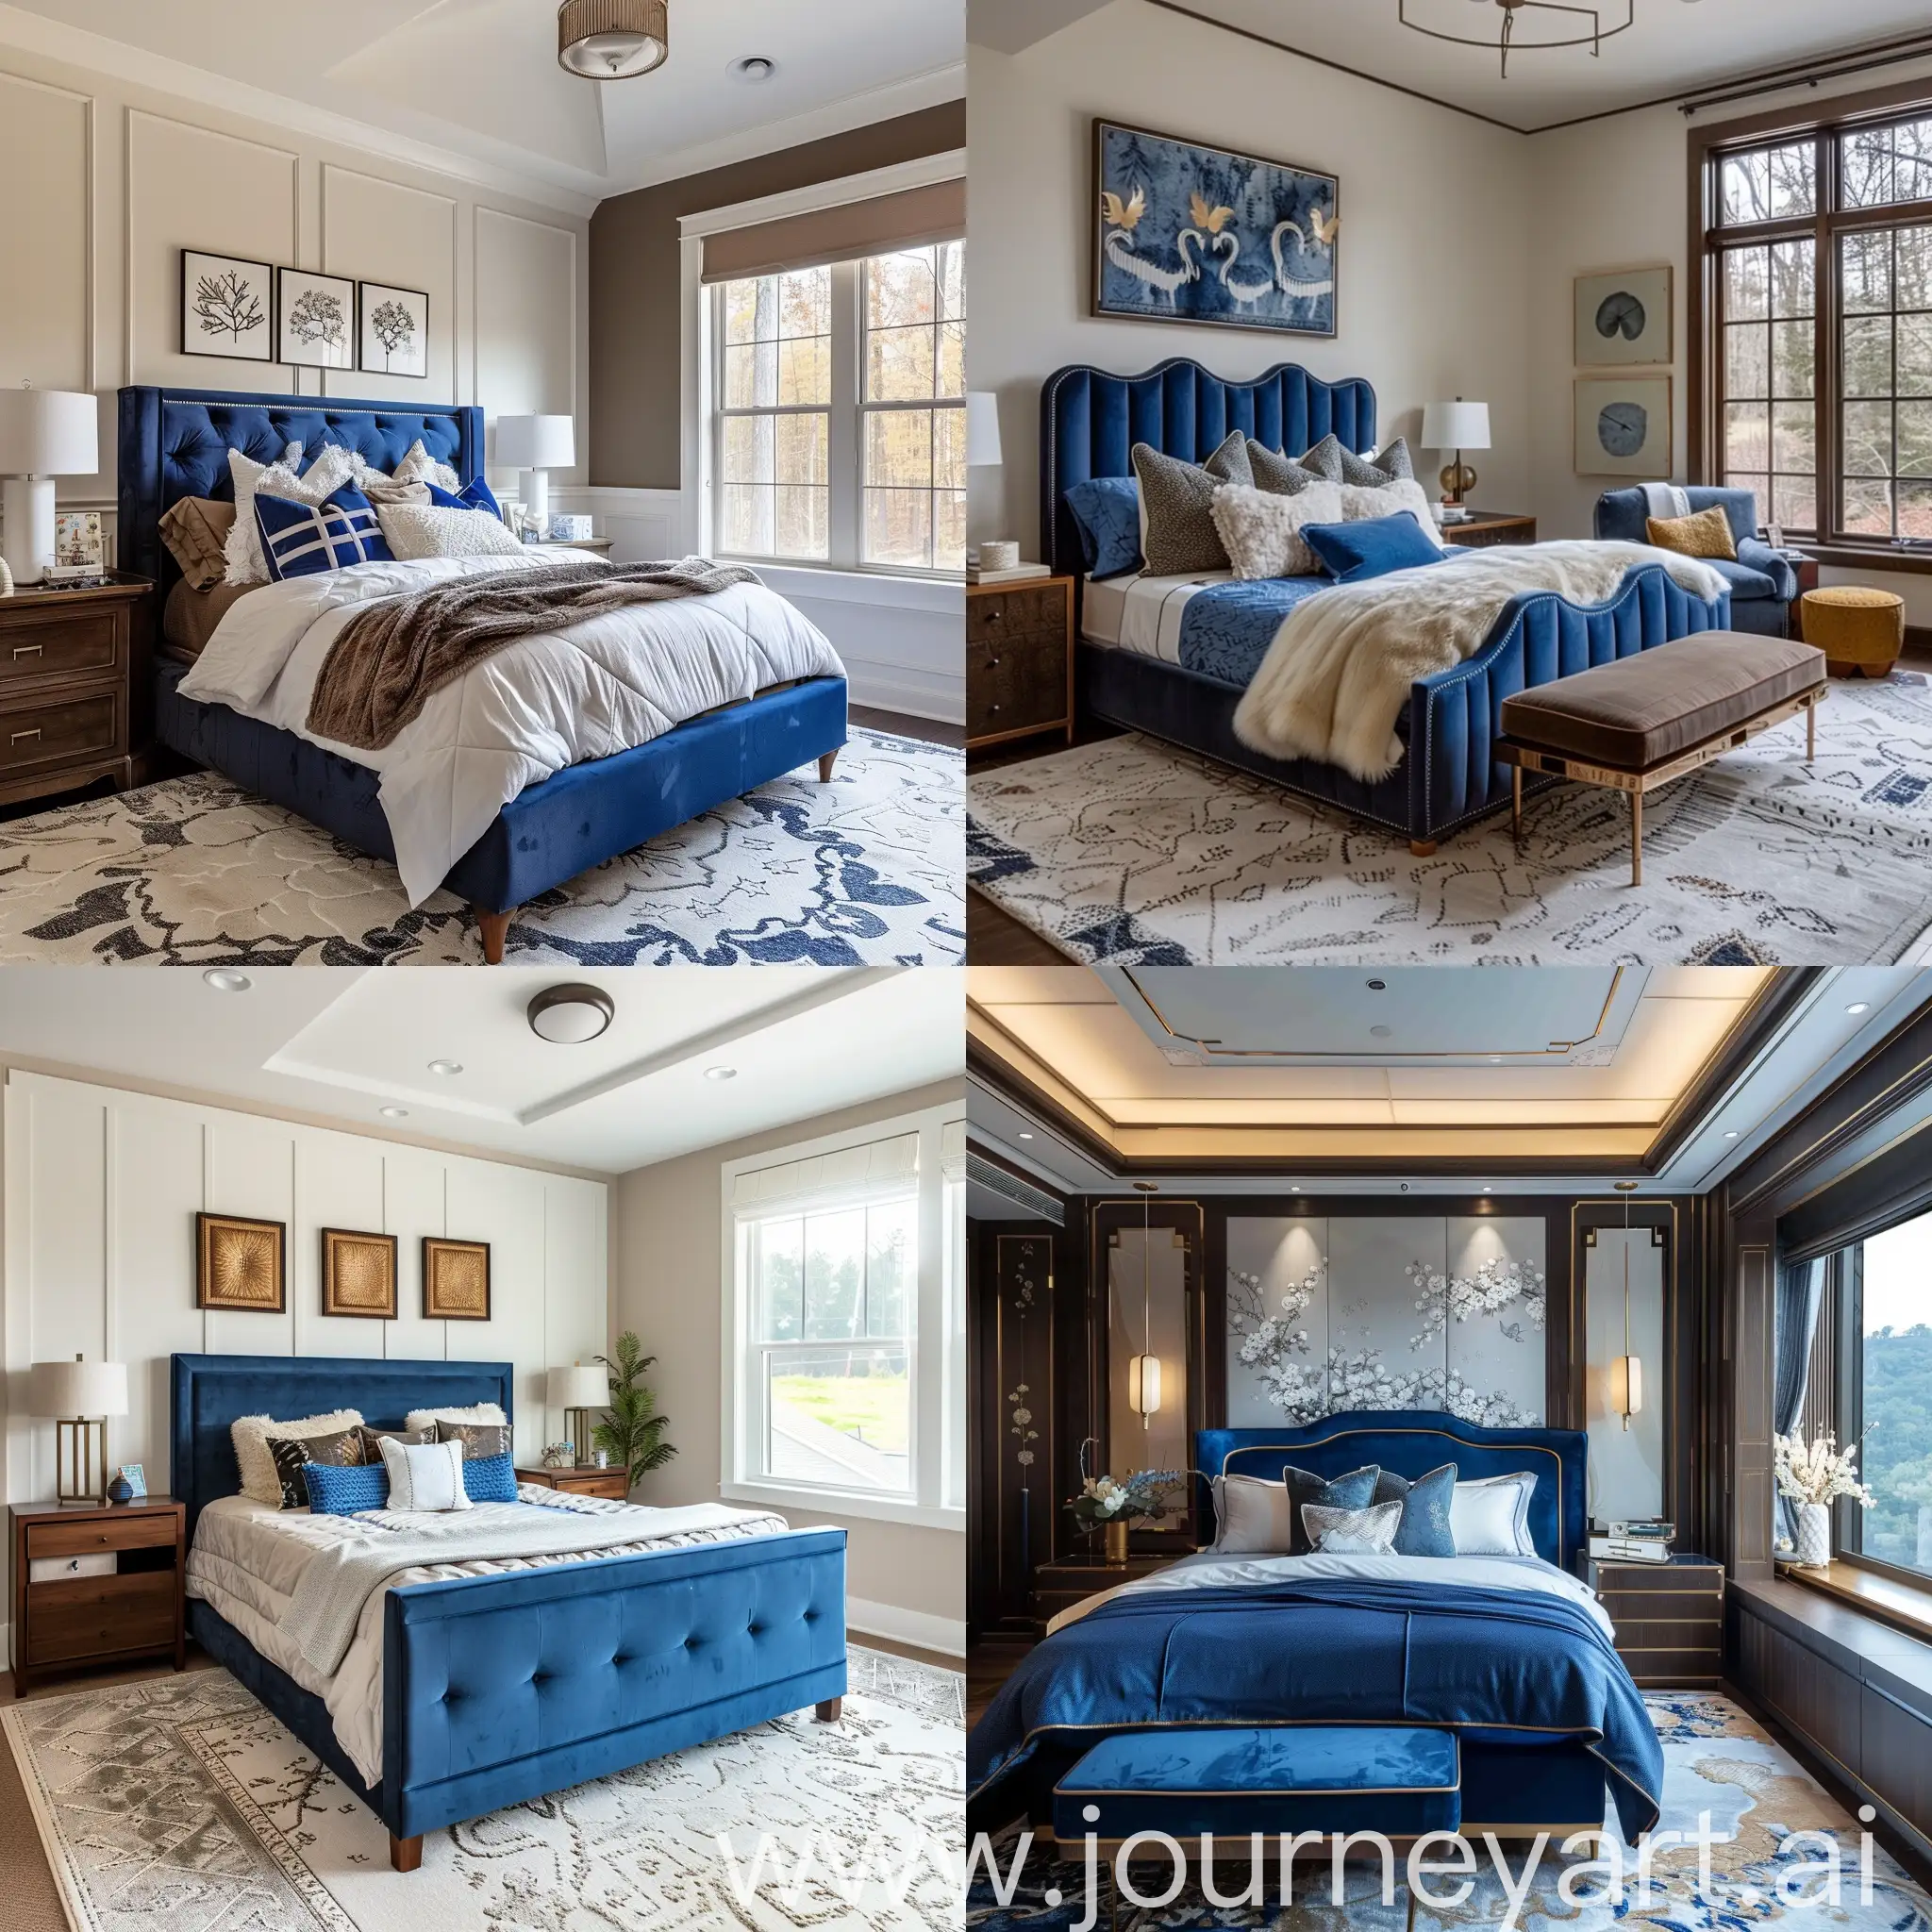 Spacious-Bedroom-with-Blue-Bed-and-Elegant-White-Decorations